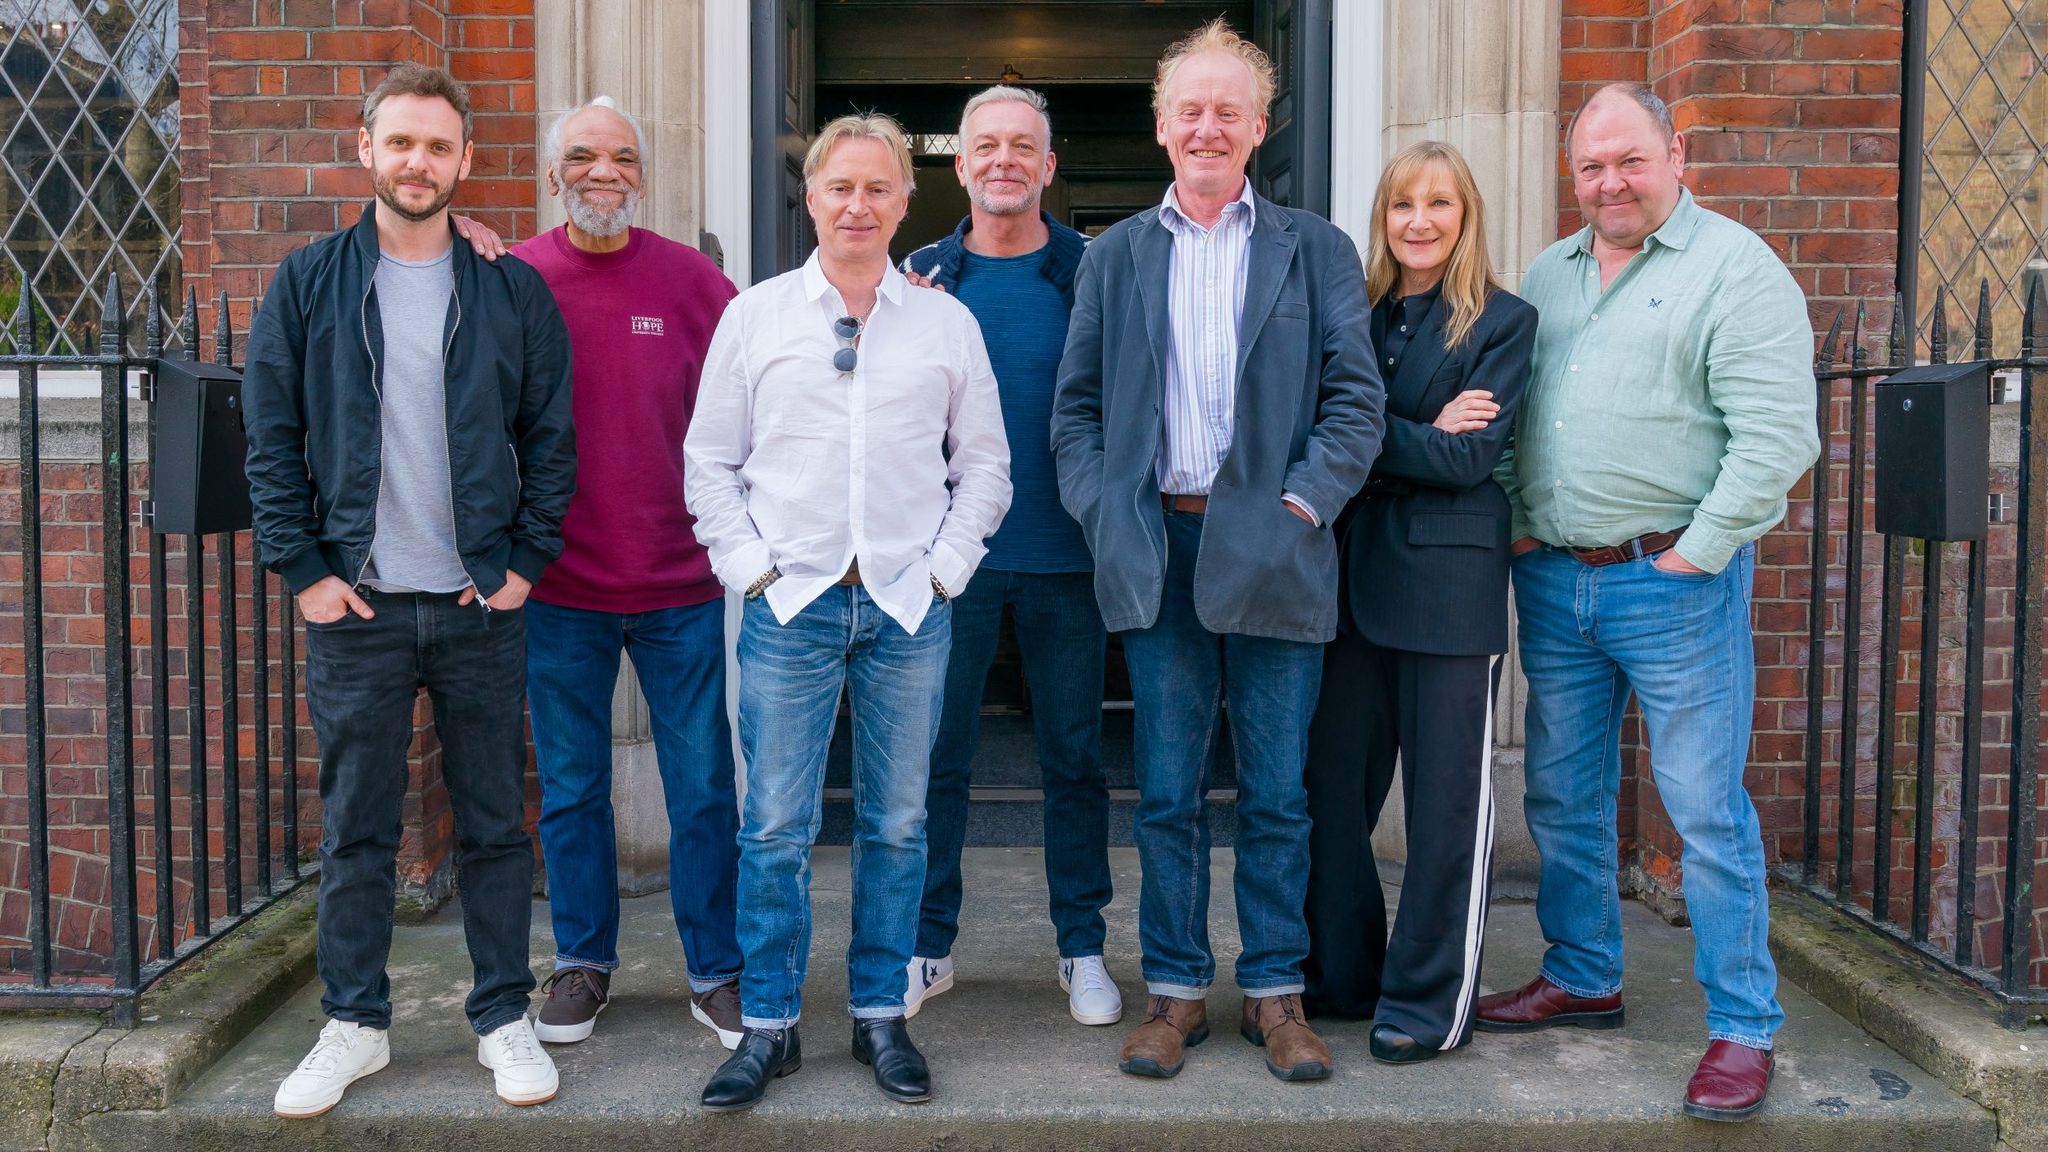 The Full Monty is set to return as a limited TV series